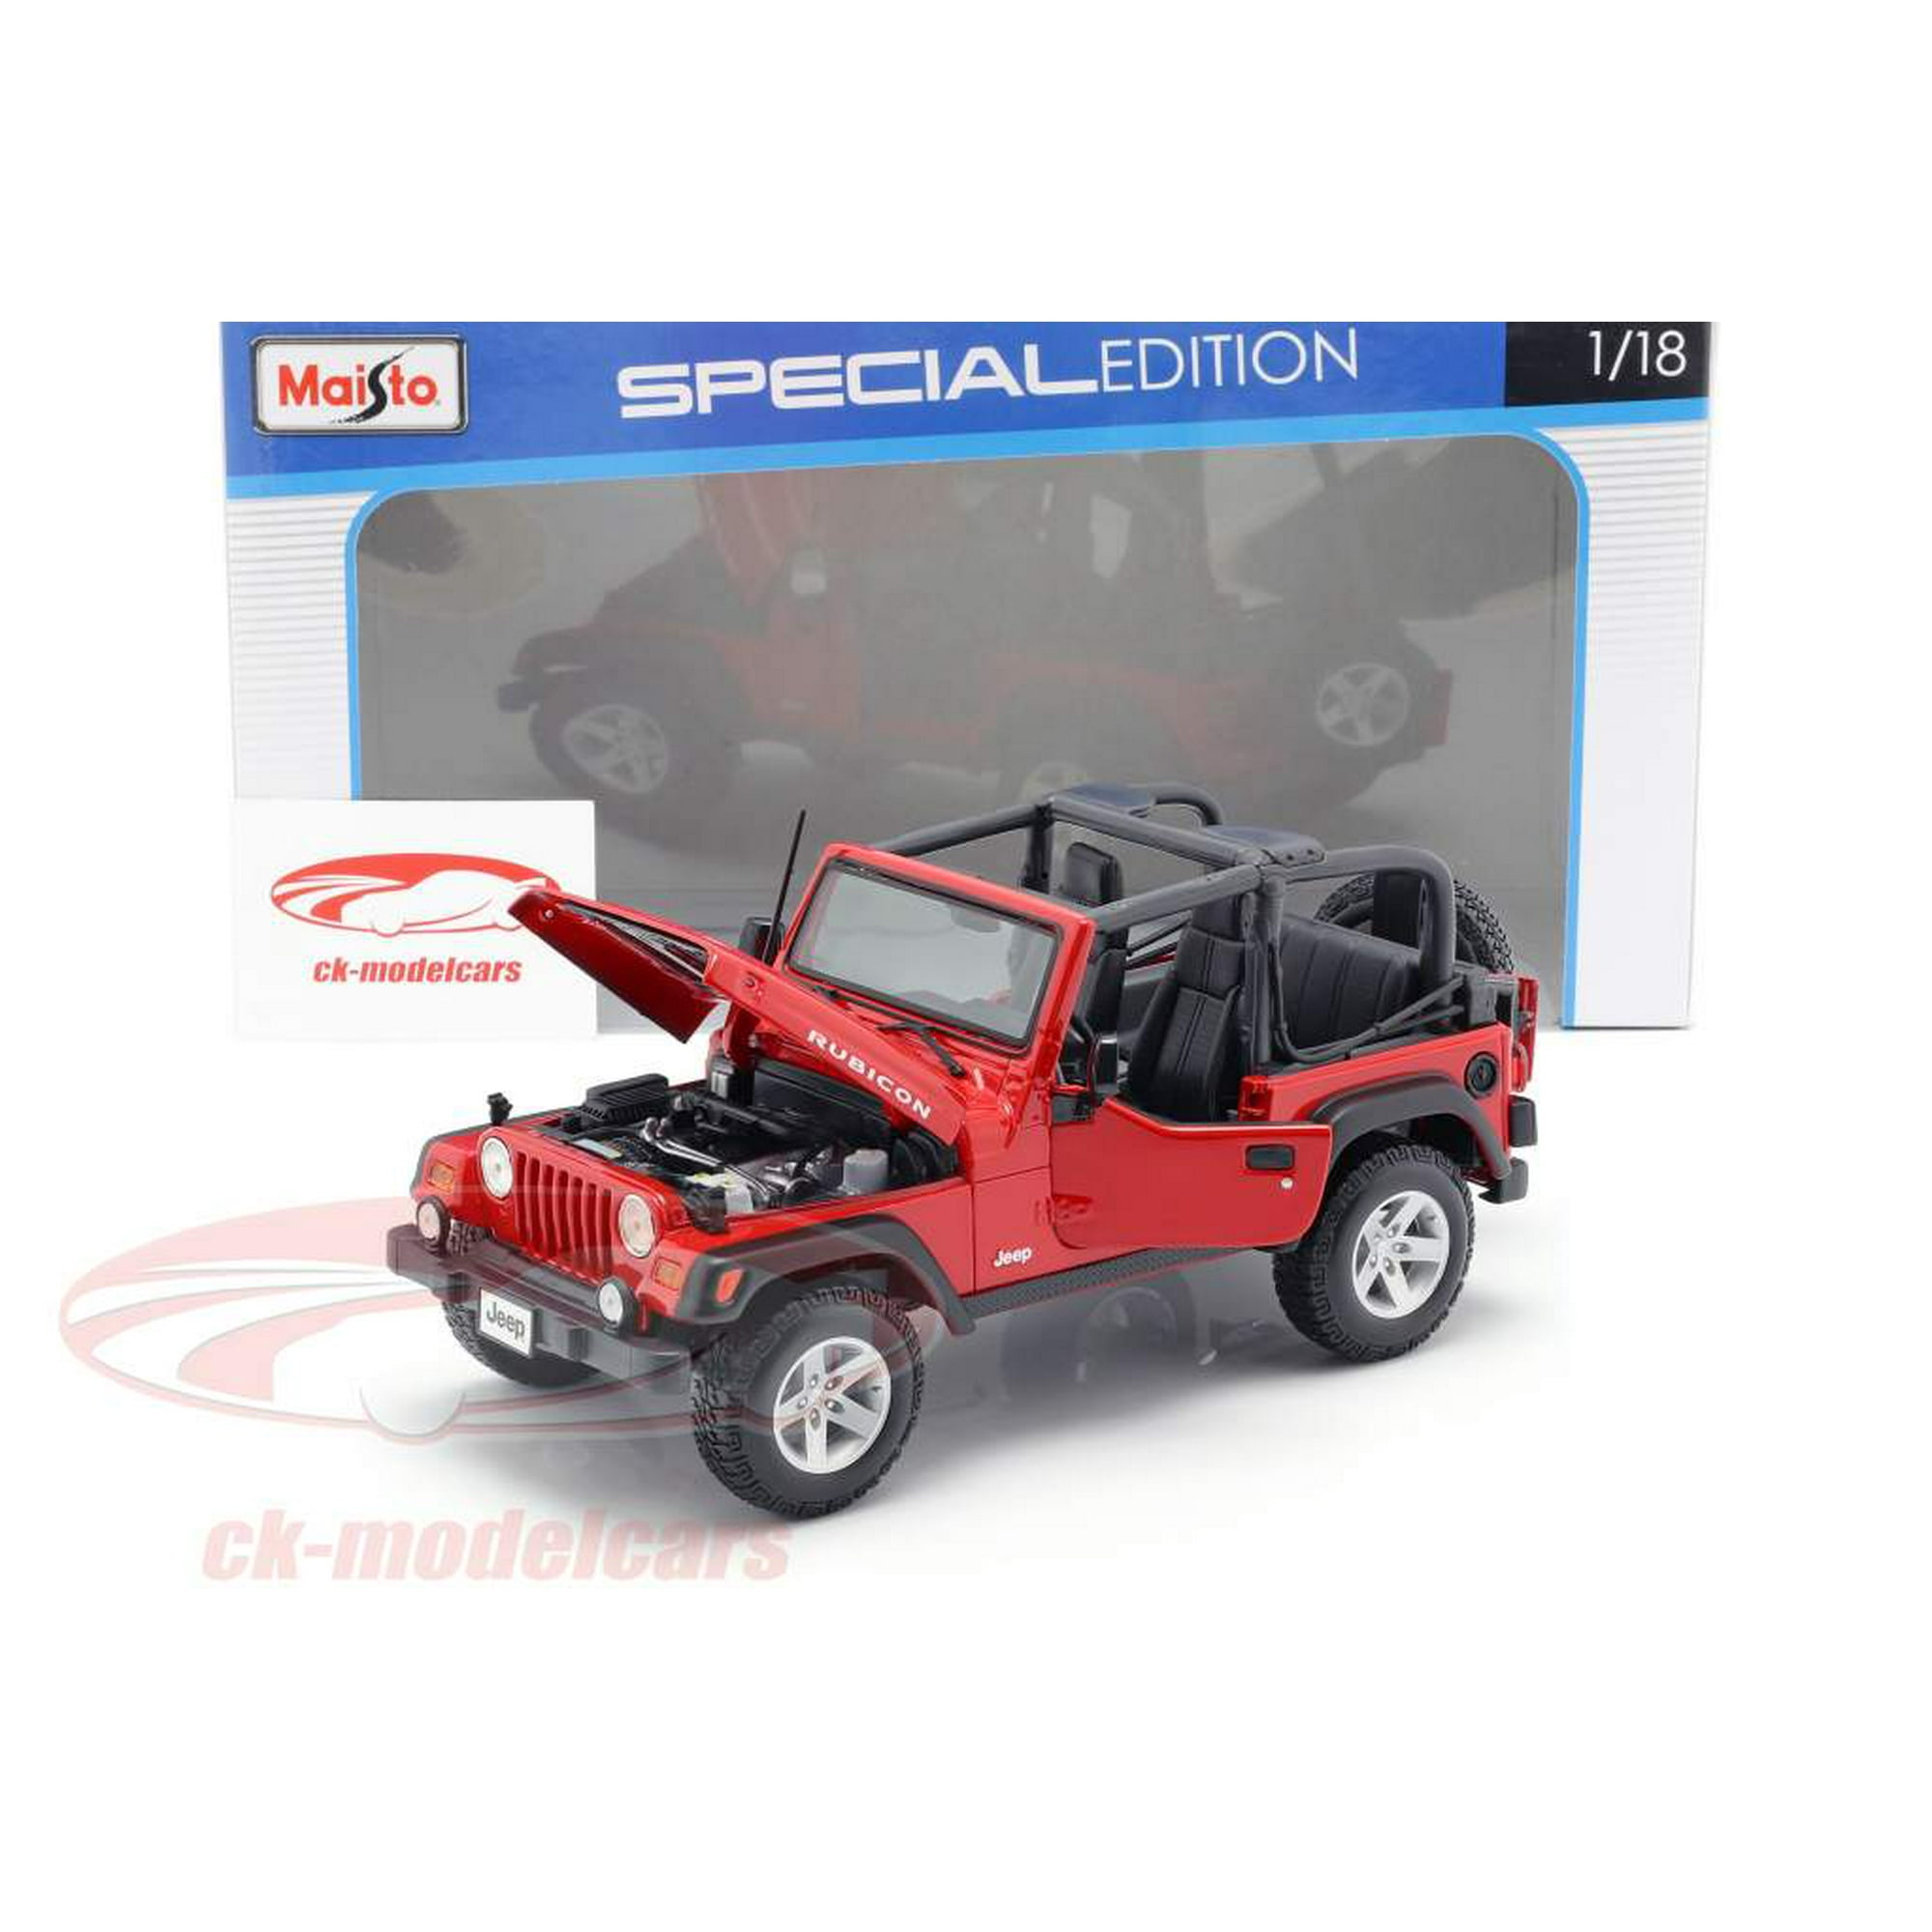 Jeep Wrangler Rubicon DieCast Metal 1/18 Scale Special Edition by Maisto -  Colors May Vary | Walmart Canada